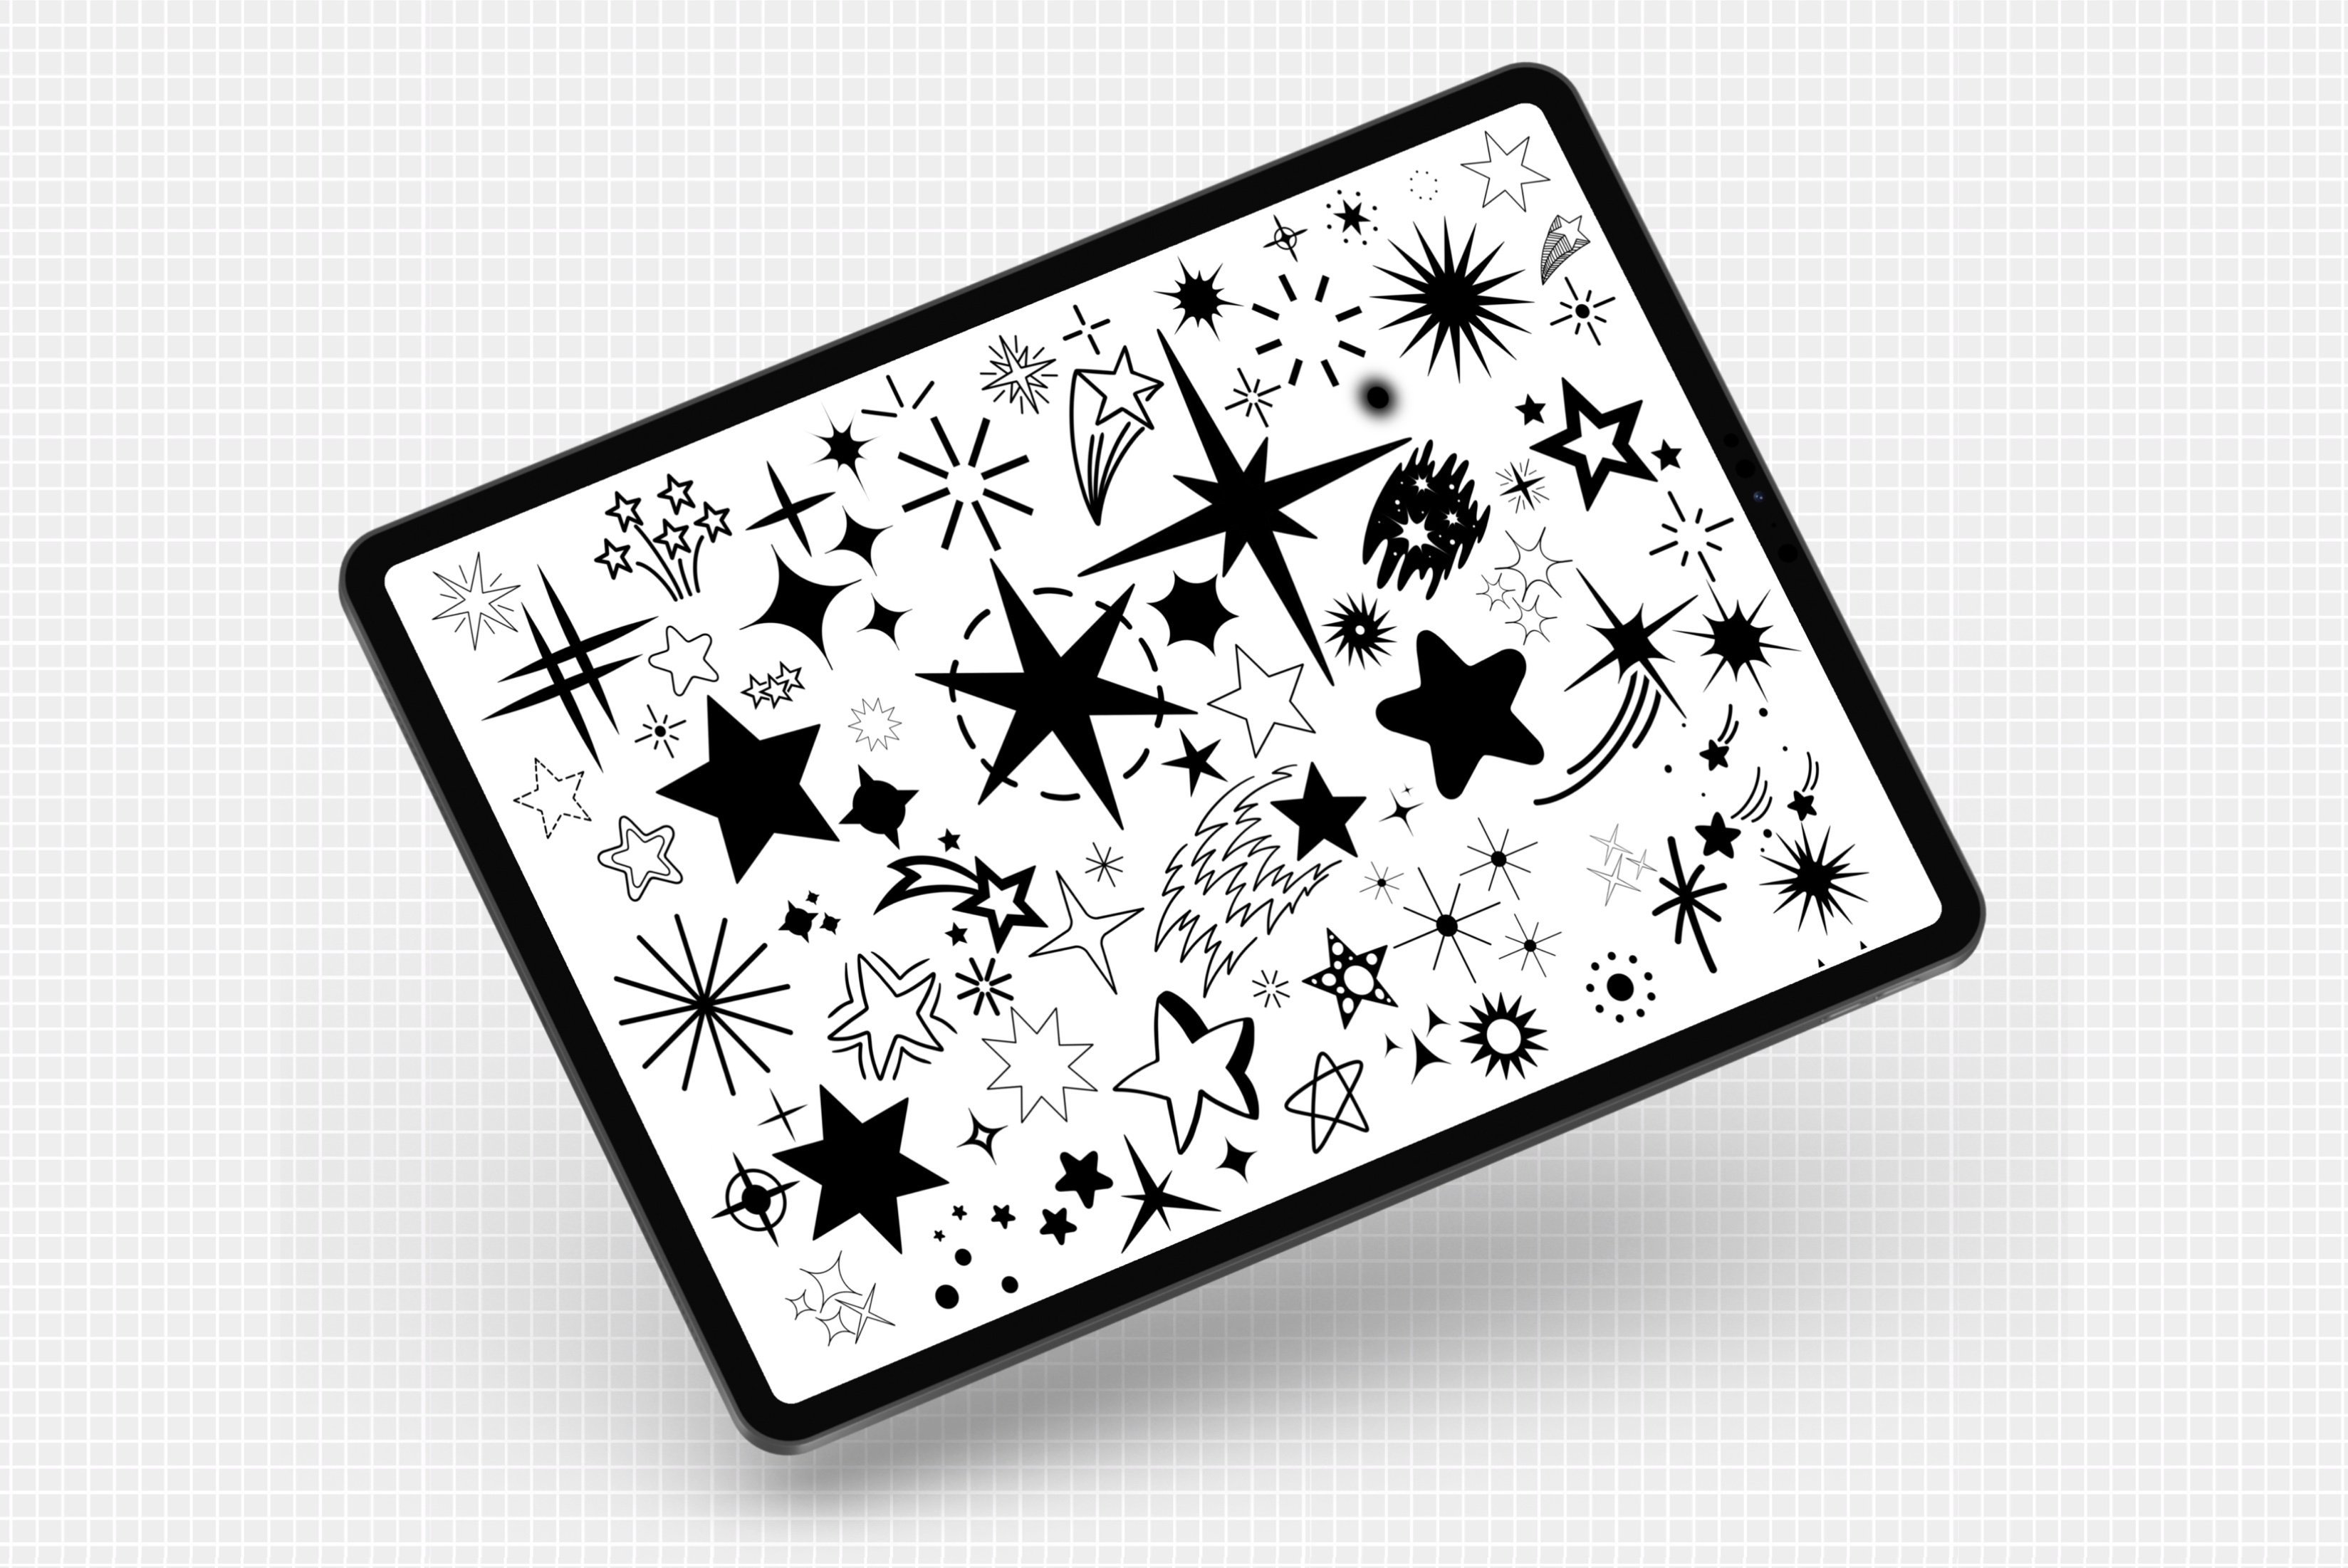 99 Photoshop Star Stamp Brushespreview image.